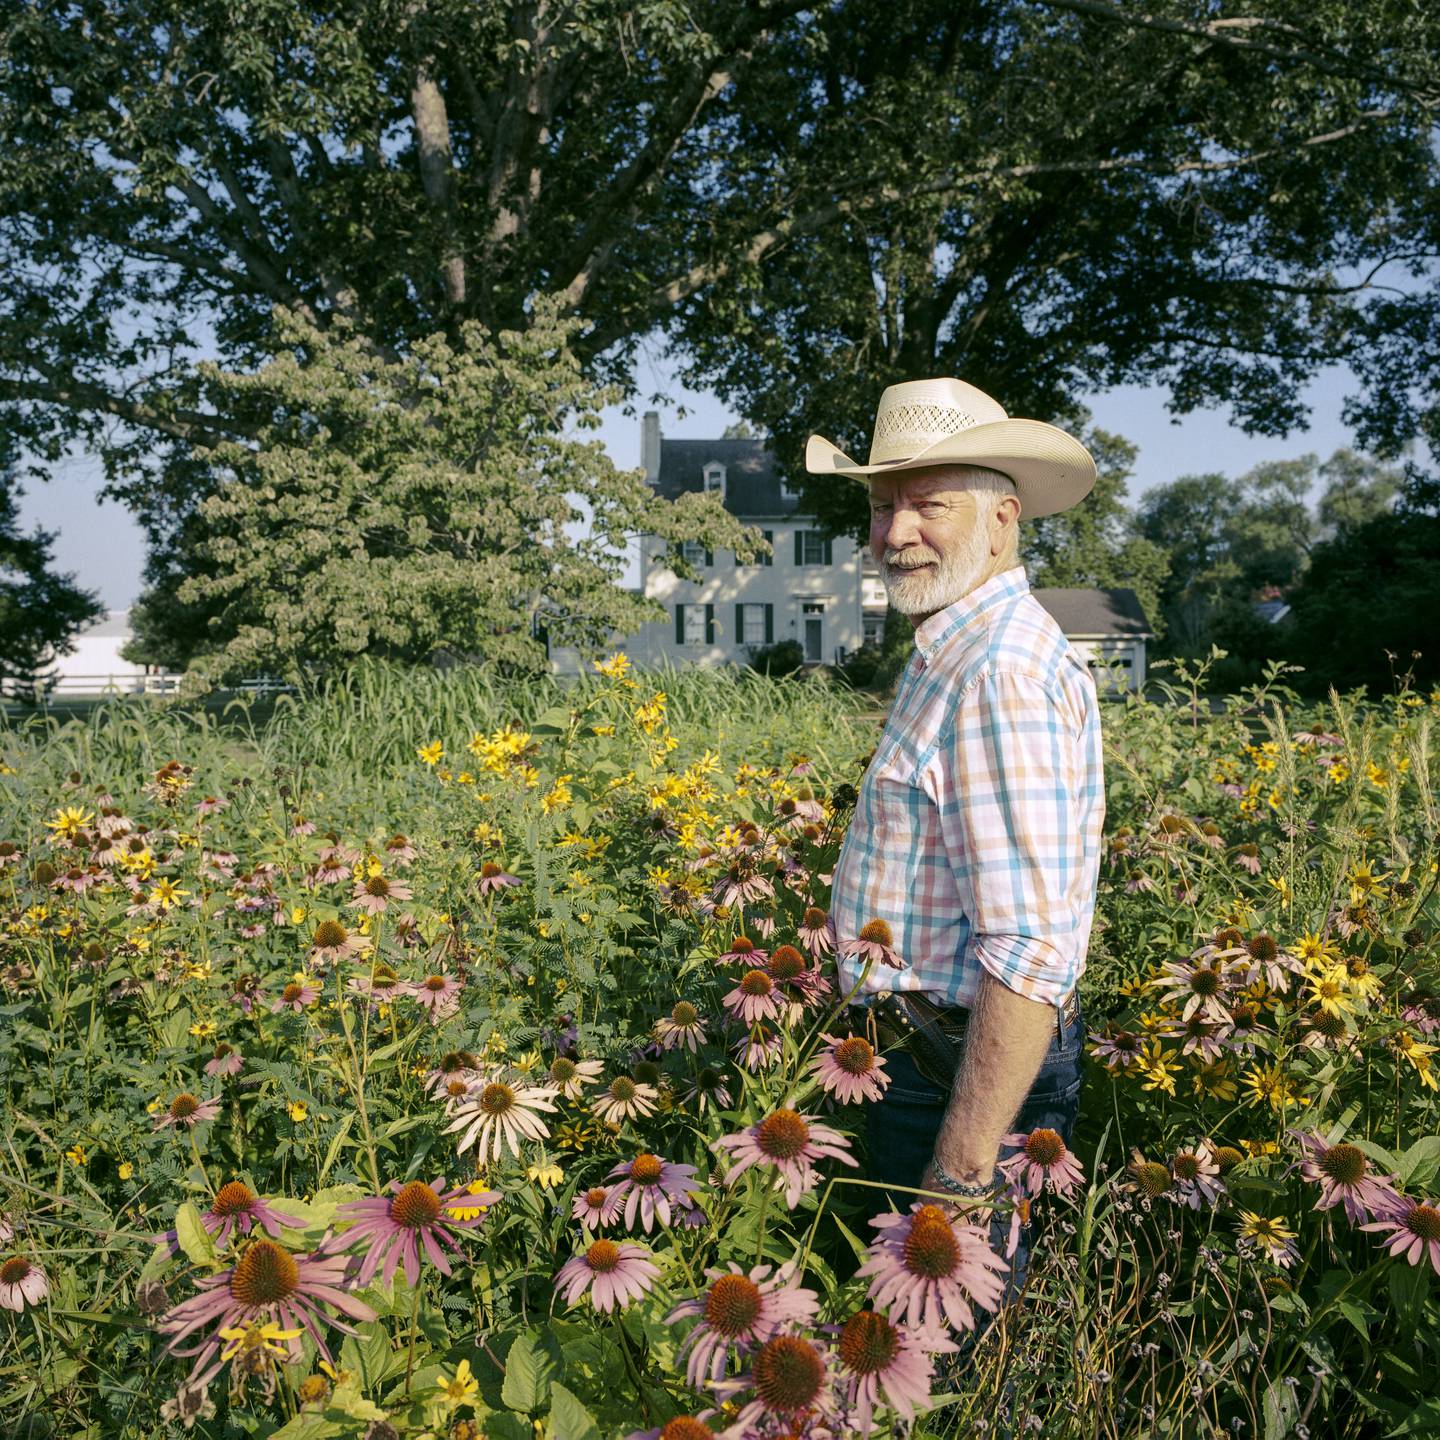 Jon stands among the wildflowers in the front yard buffer strip at the Emory Farm on August 4th, 2022 in Queenstown Maryland